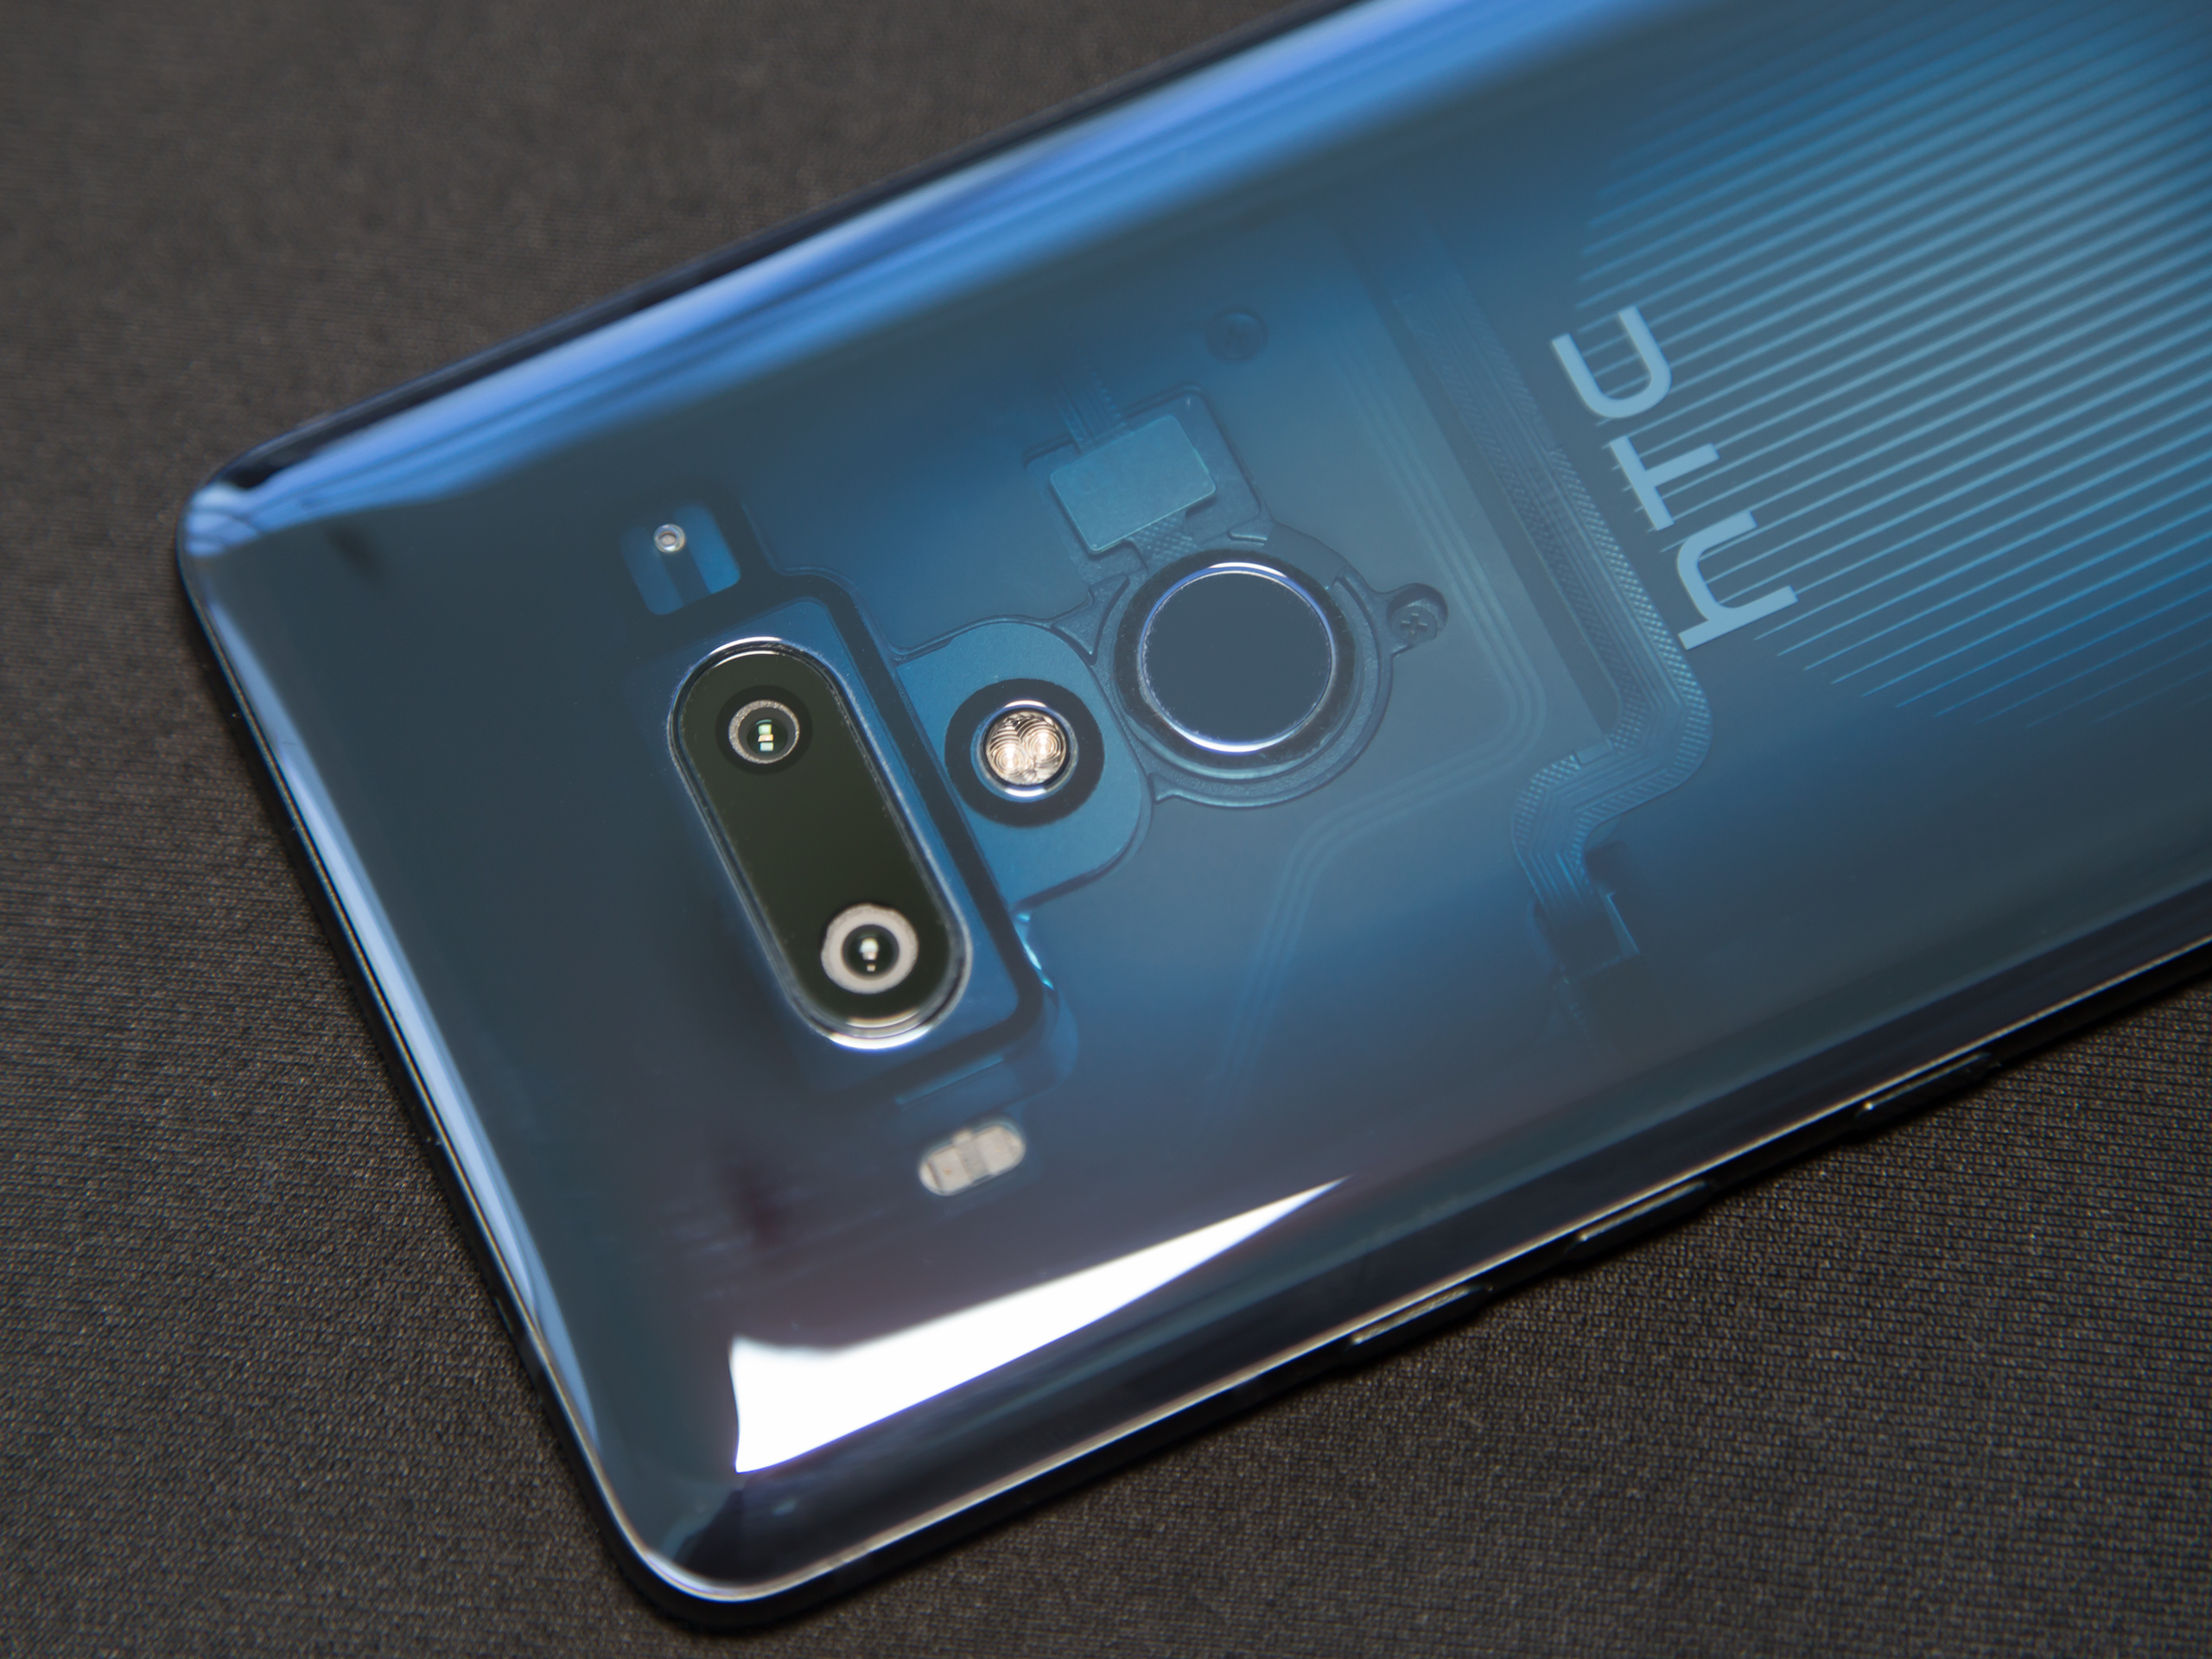 HTC U12 Plus: Everything You Need to Know About HTC's New Phone